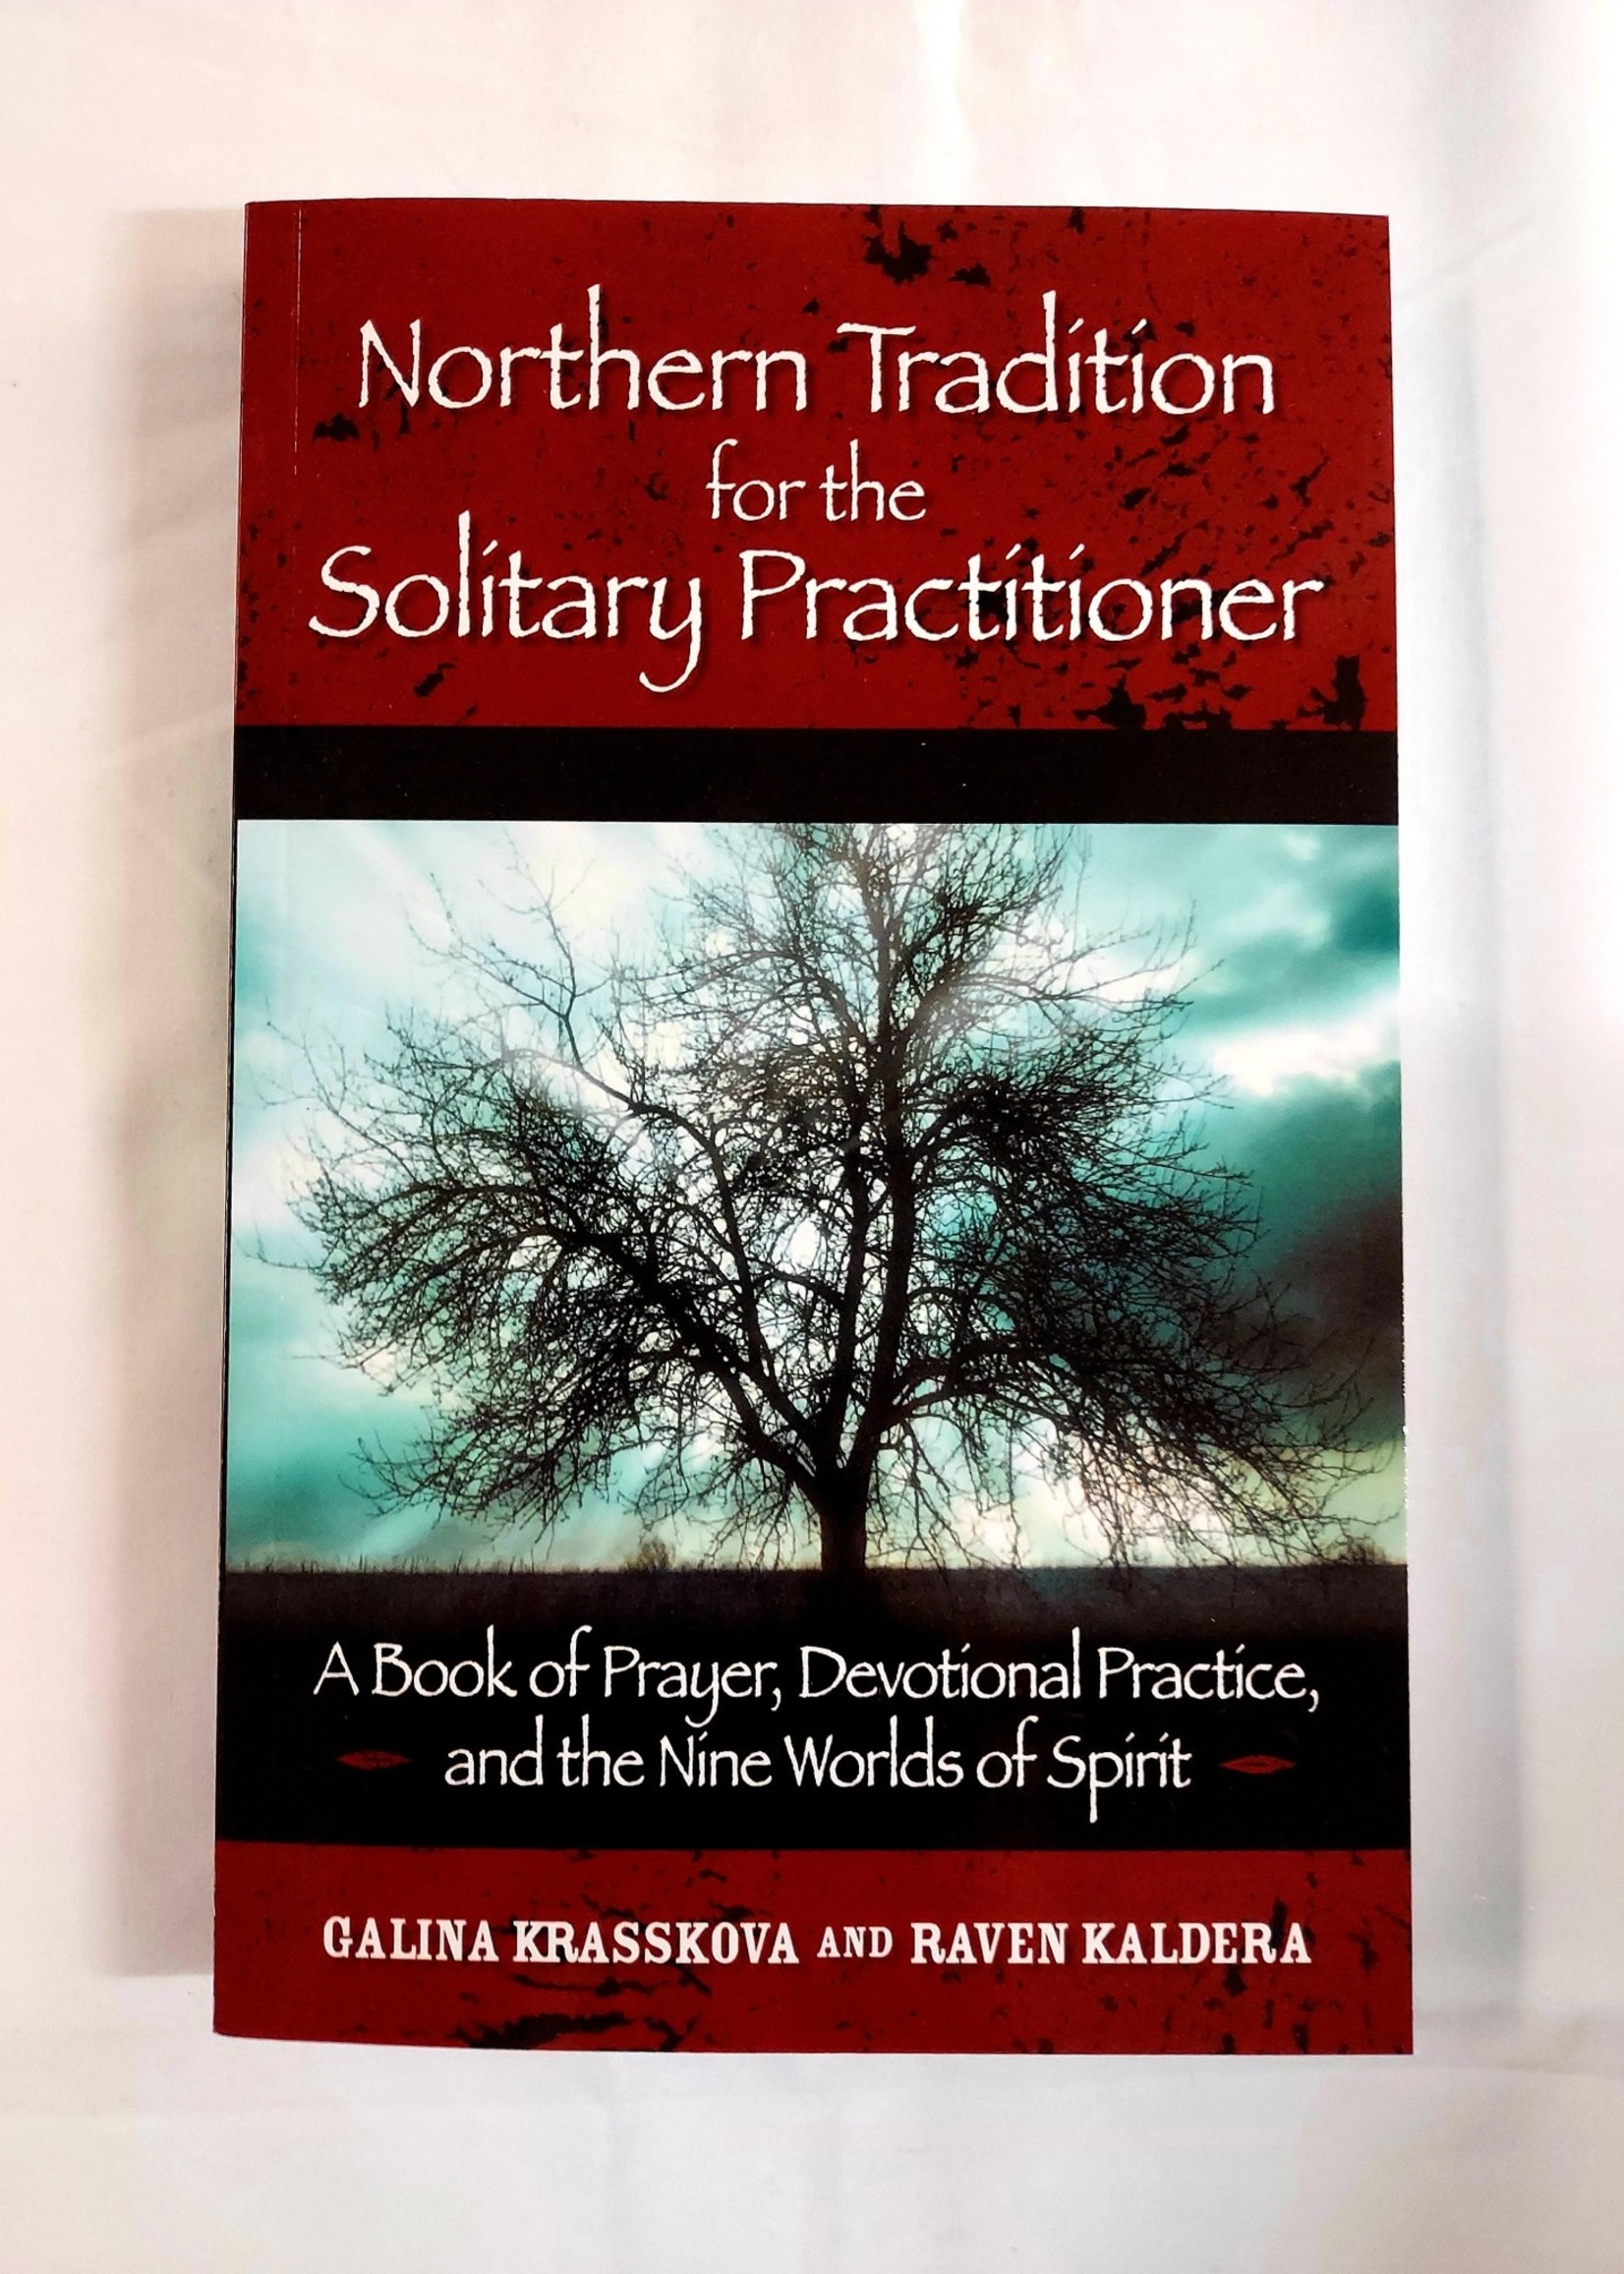 Northern Tradition for the Solitary Practitioner A Book of Prayer, Devotional Practice, and the Nine Worlds of Spirit - by